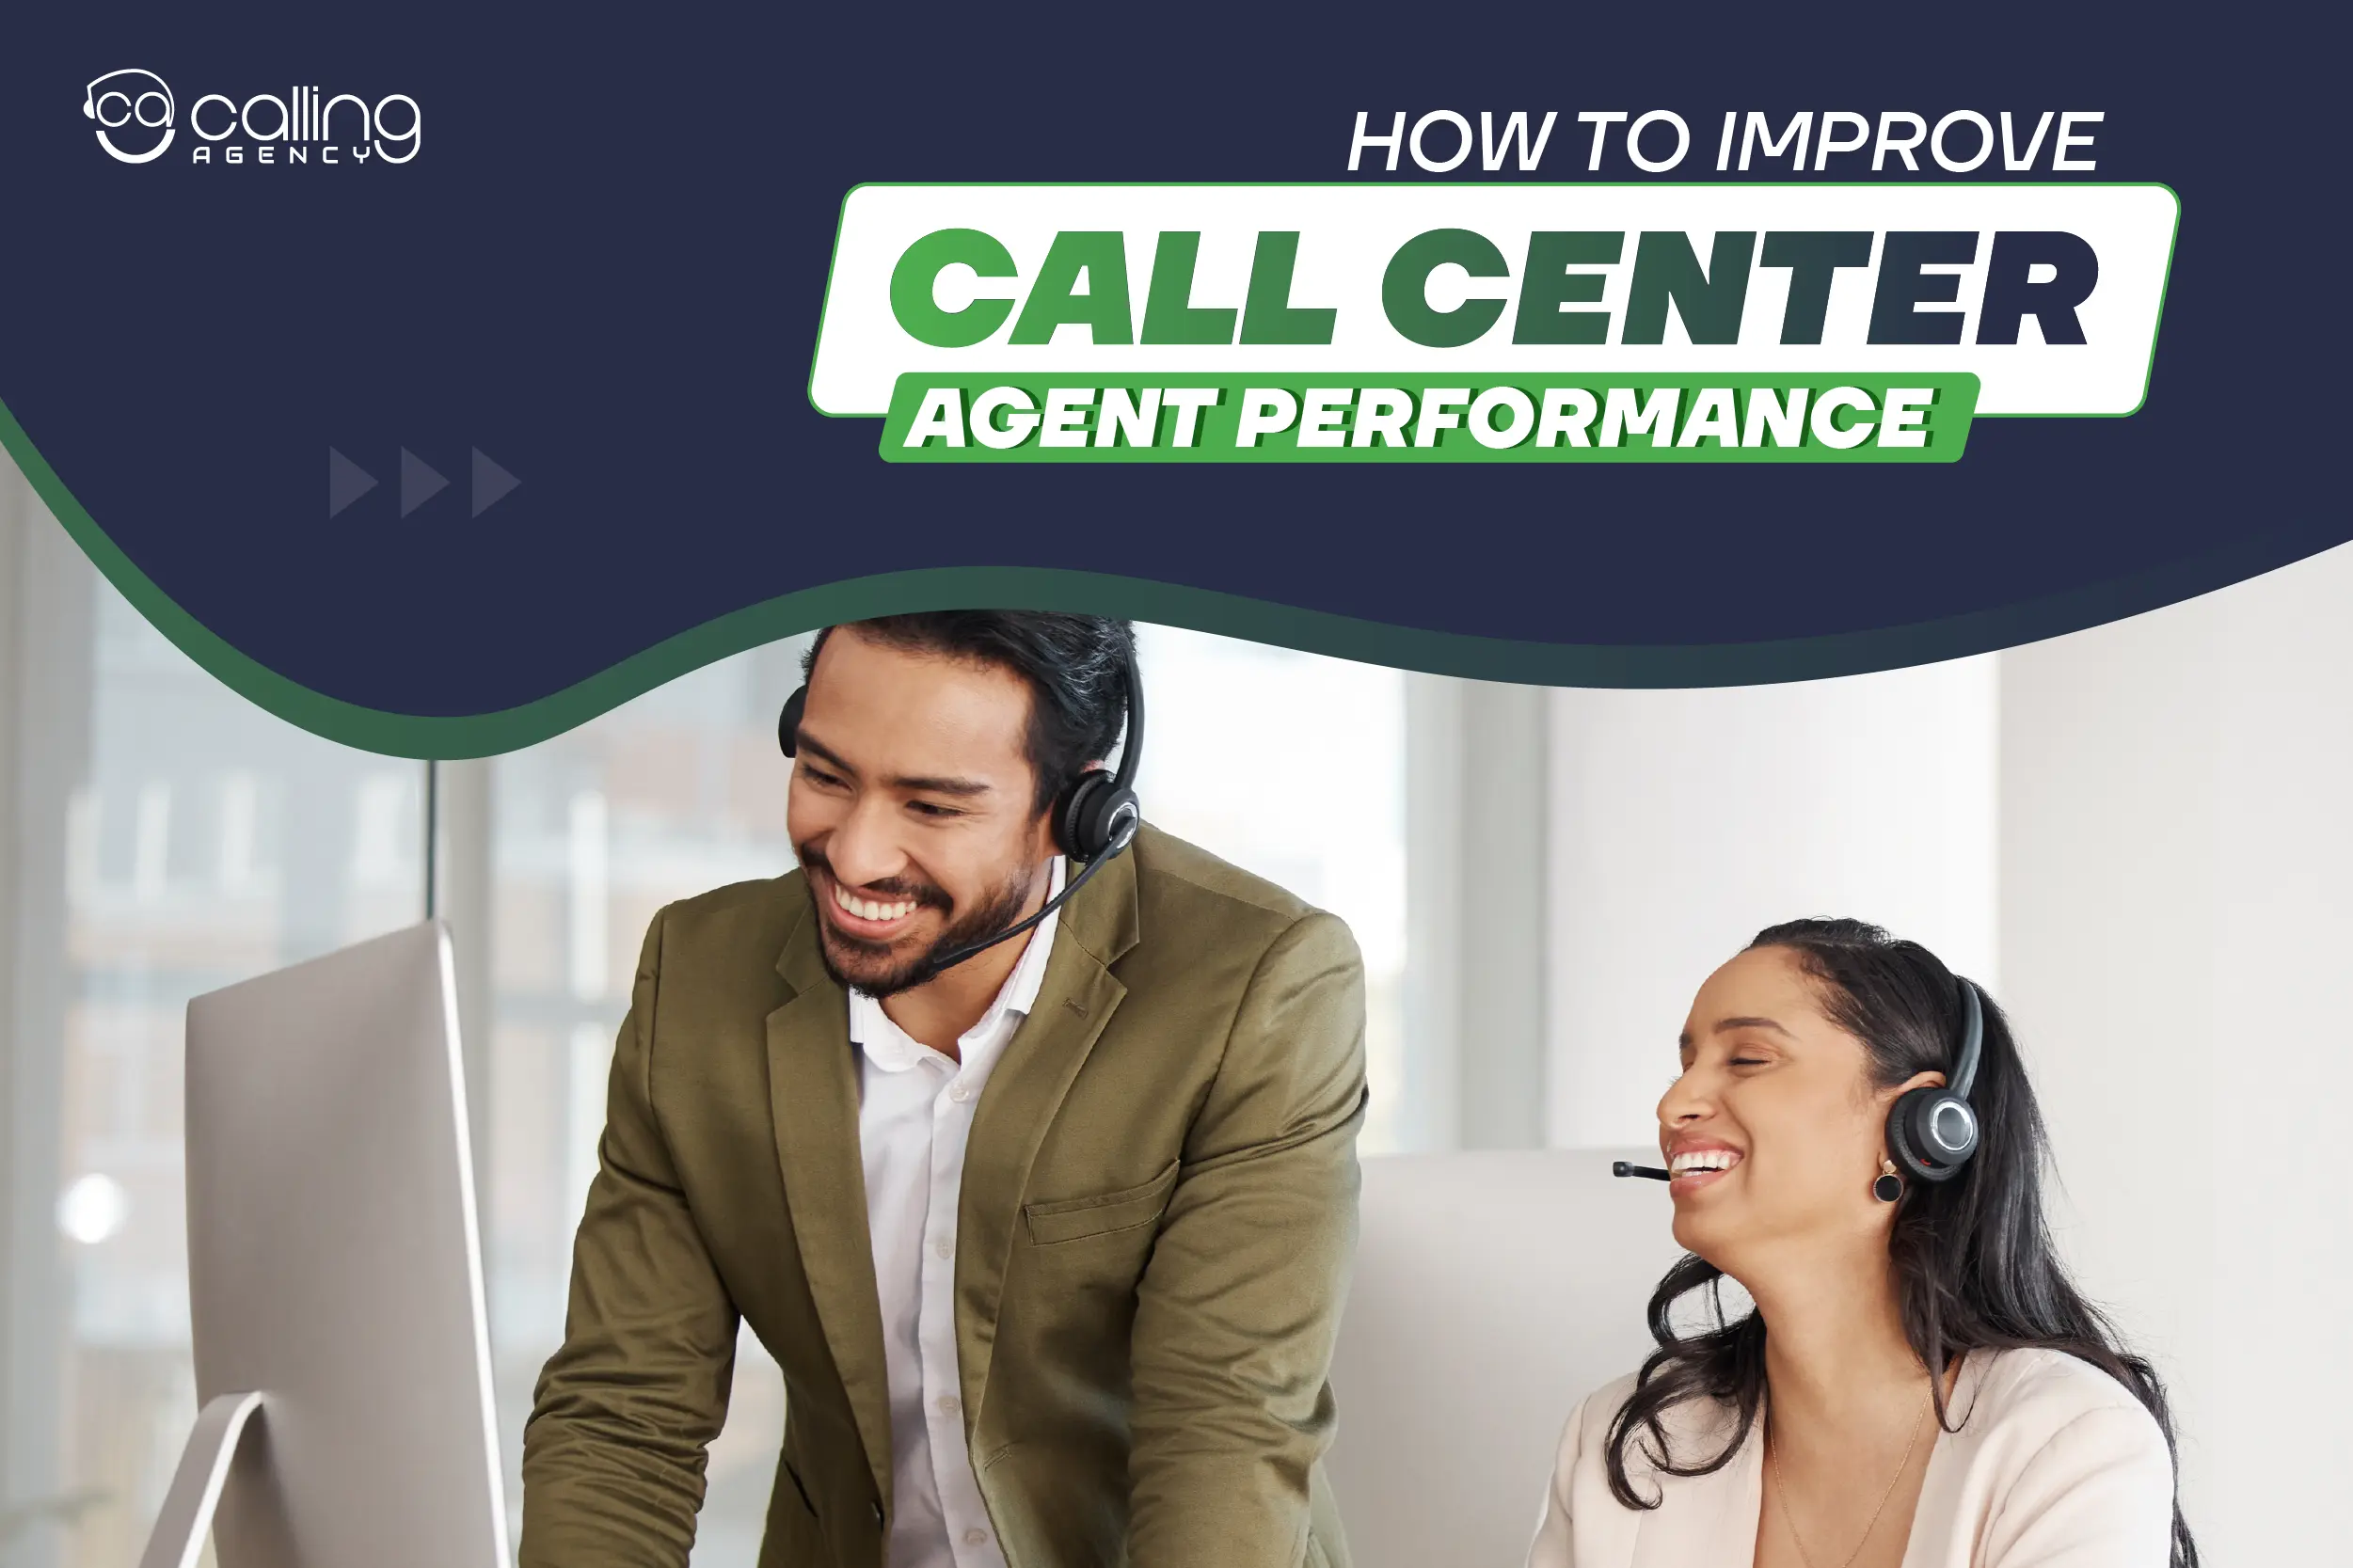 How to Improve Call Center Agent Performance